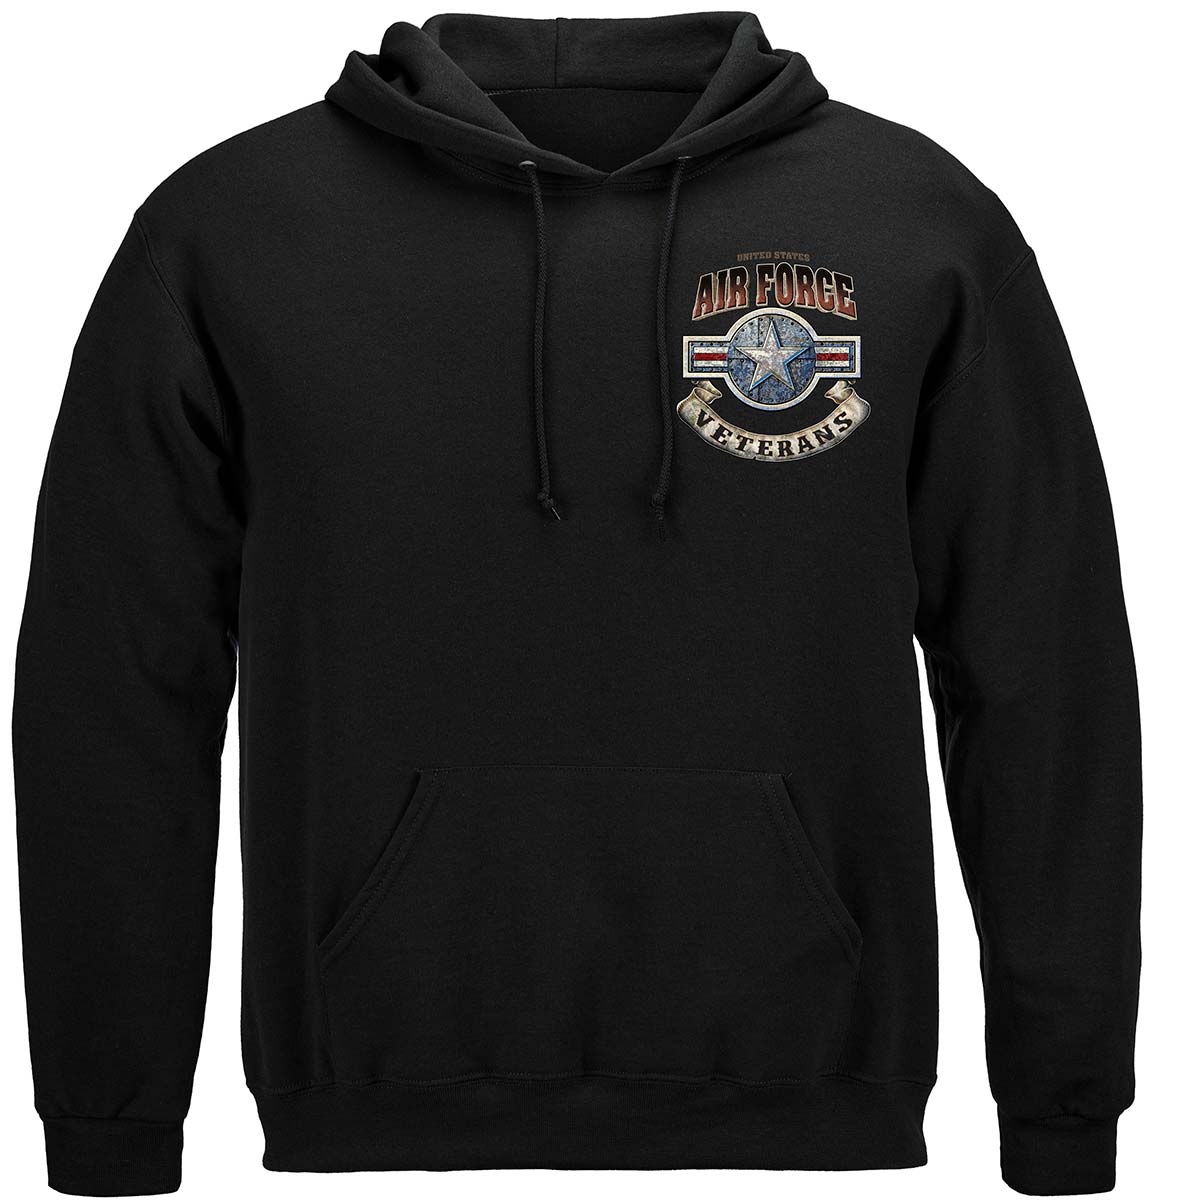 Air Force Proud To Have Served Premium Hooded Sweat Shirt